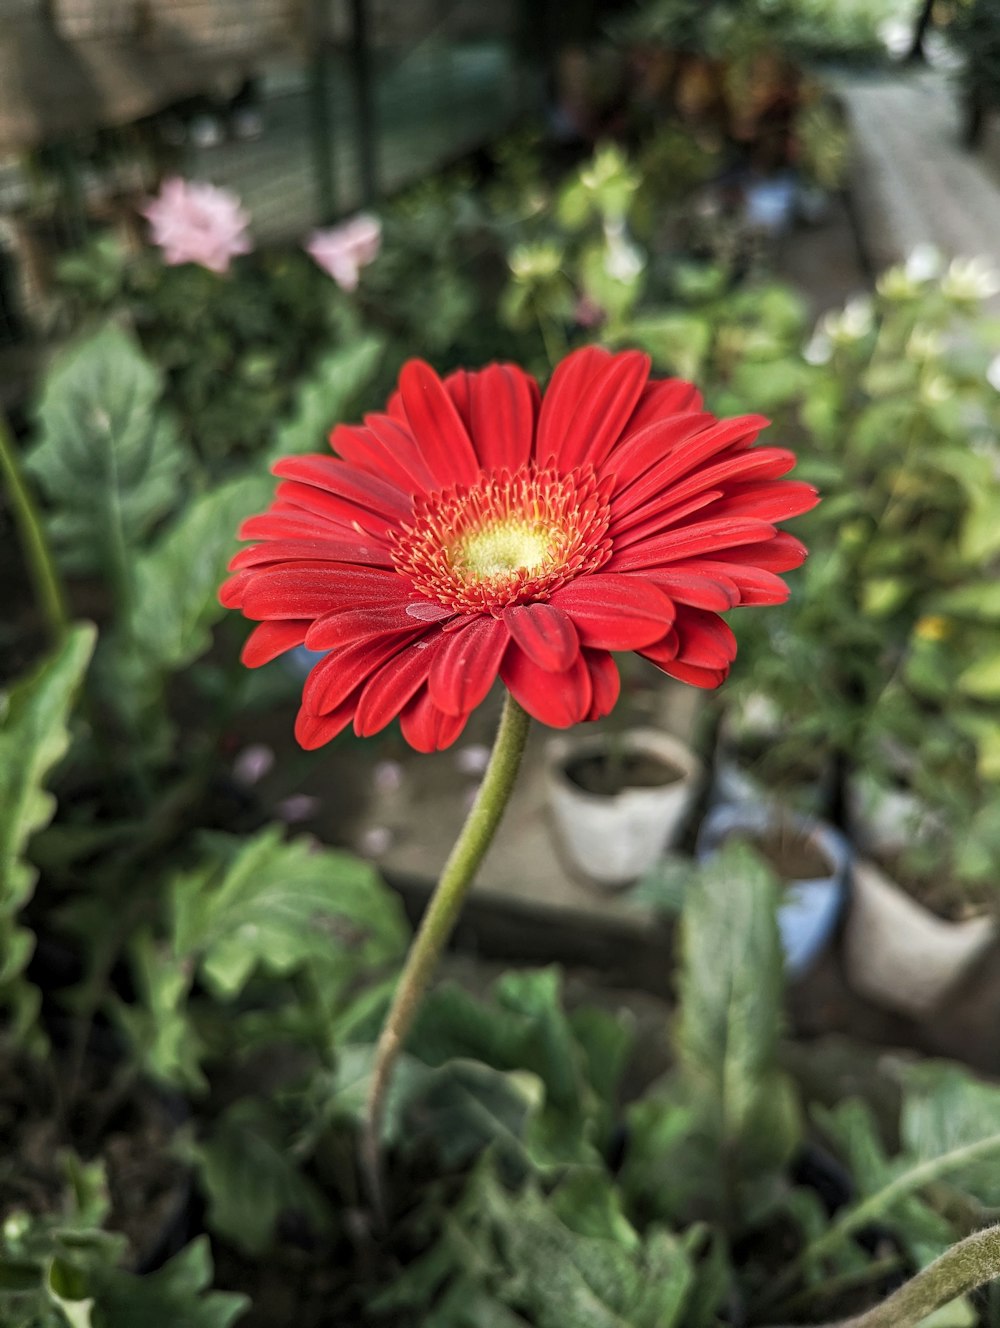 a red flower in a garden filled with lots of plants